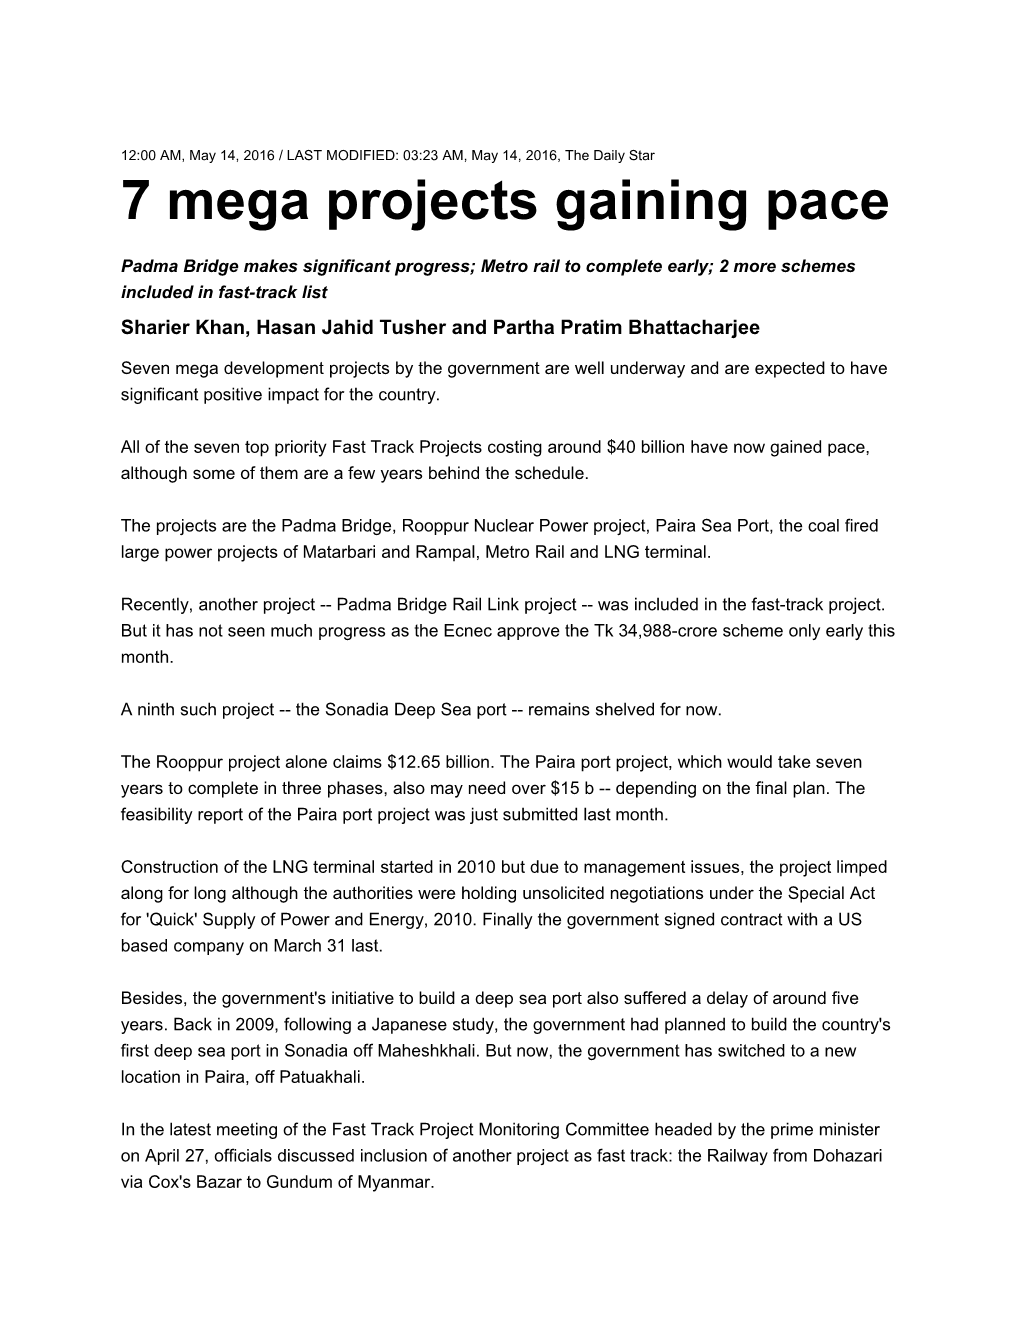 7 Mega Projects Gaining Pace